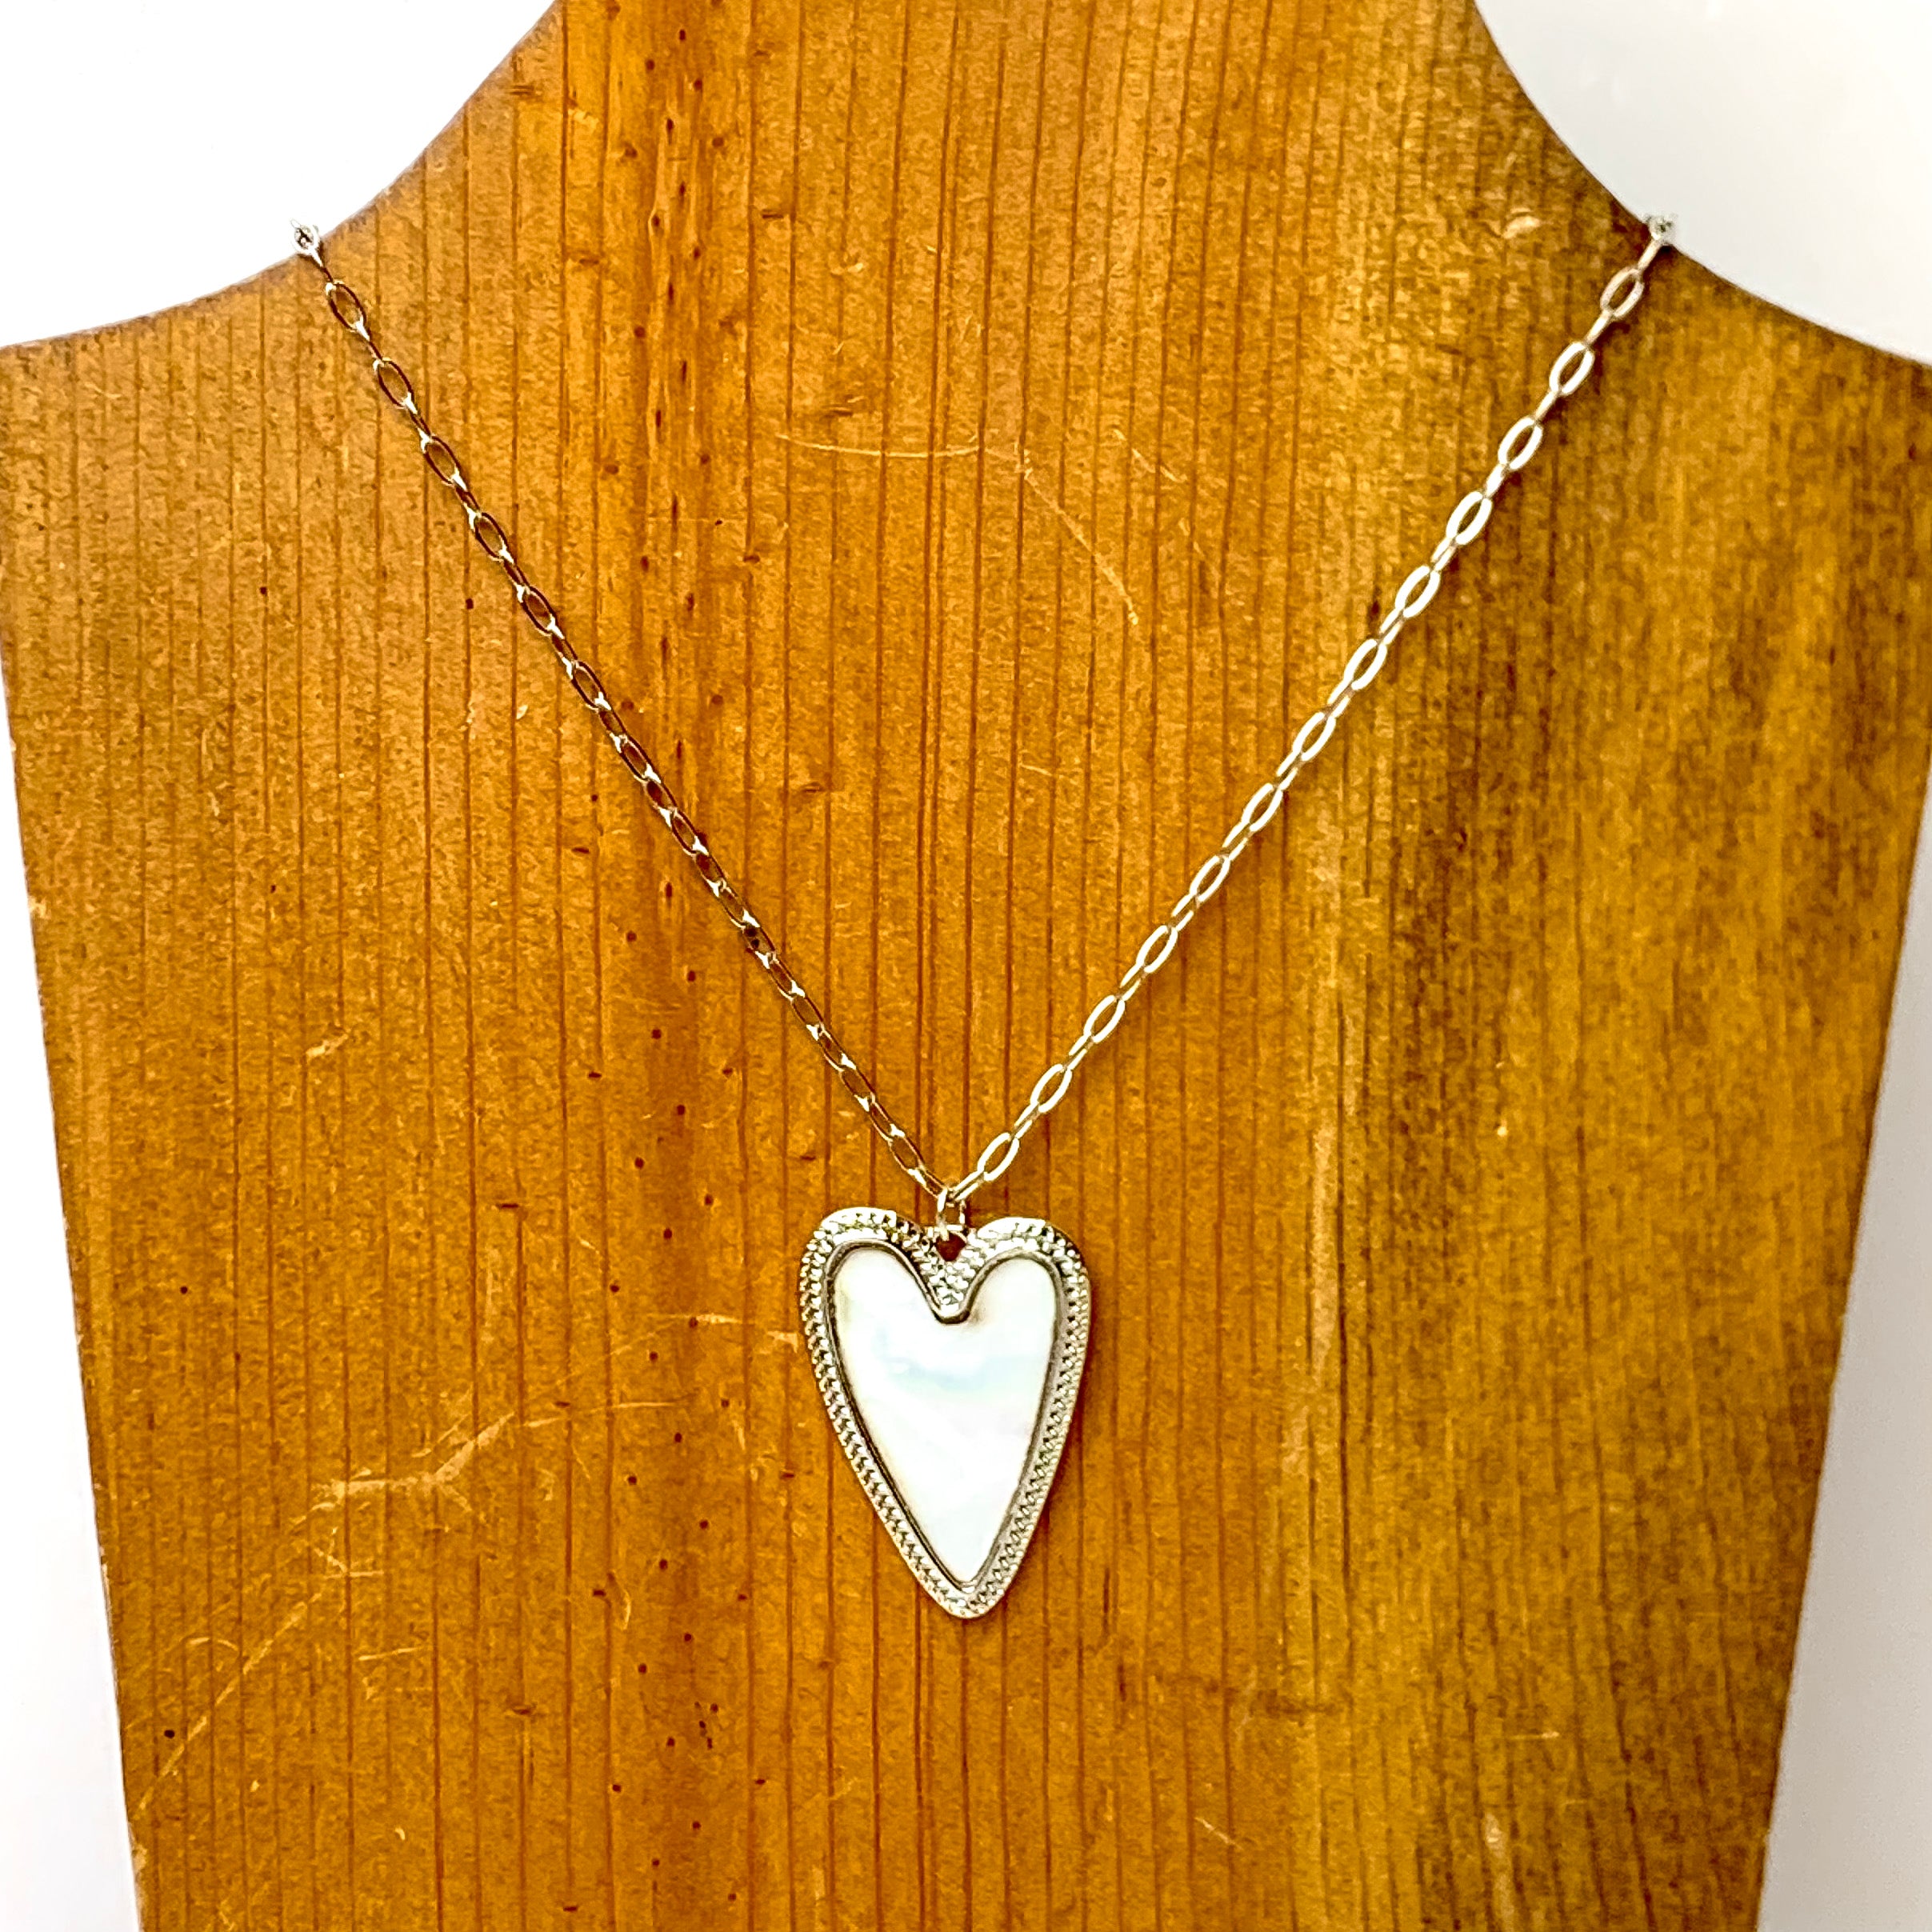 Chain Necklace with Mother of Pearl Heart Pendant in Silver - Giddy Up Glamour Boutique